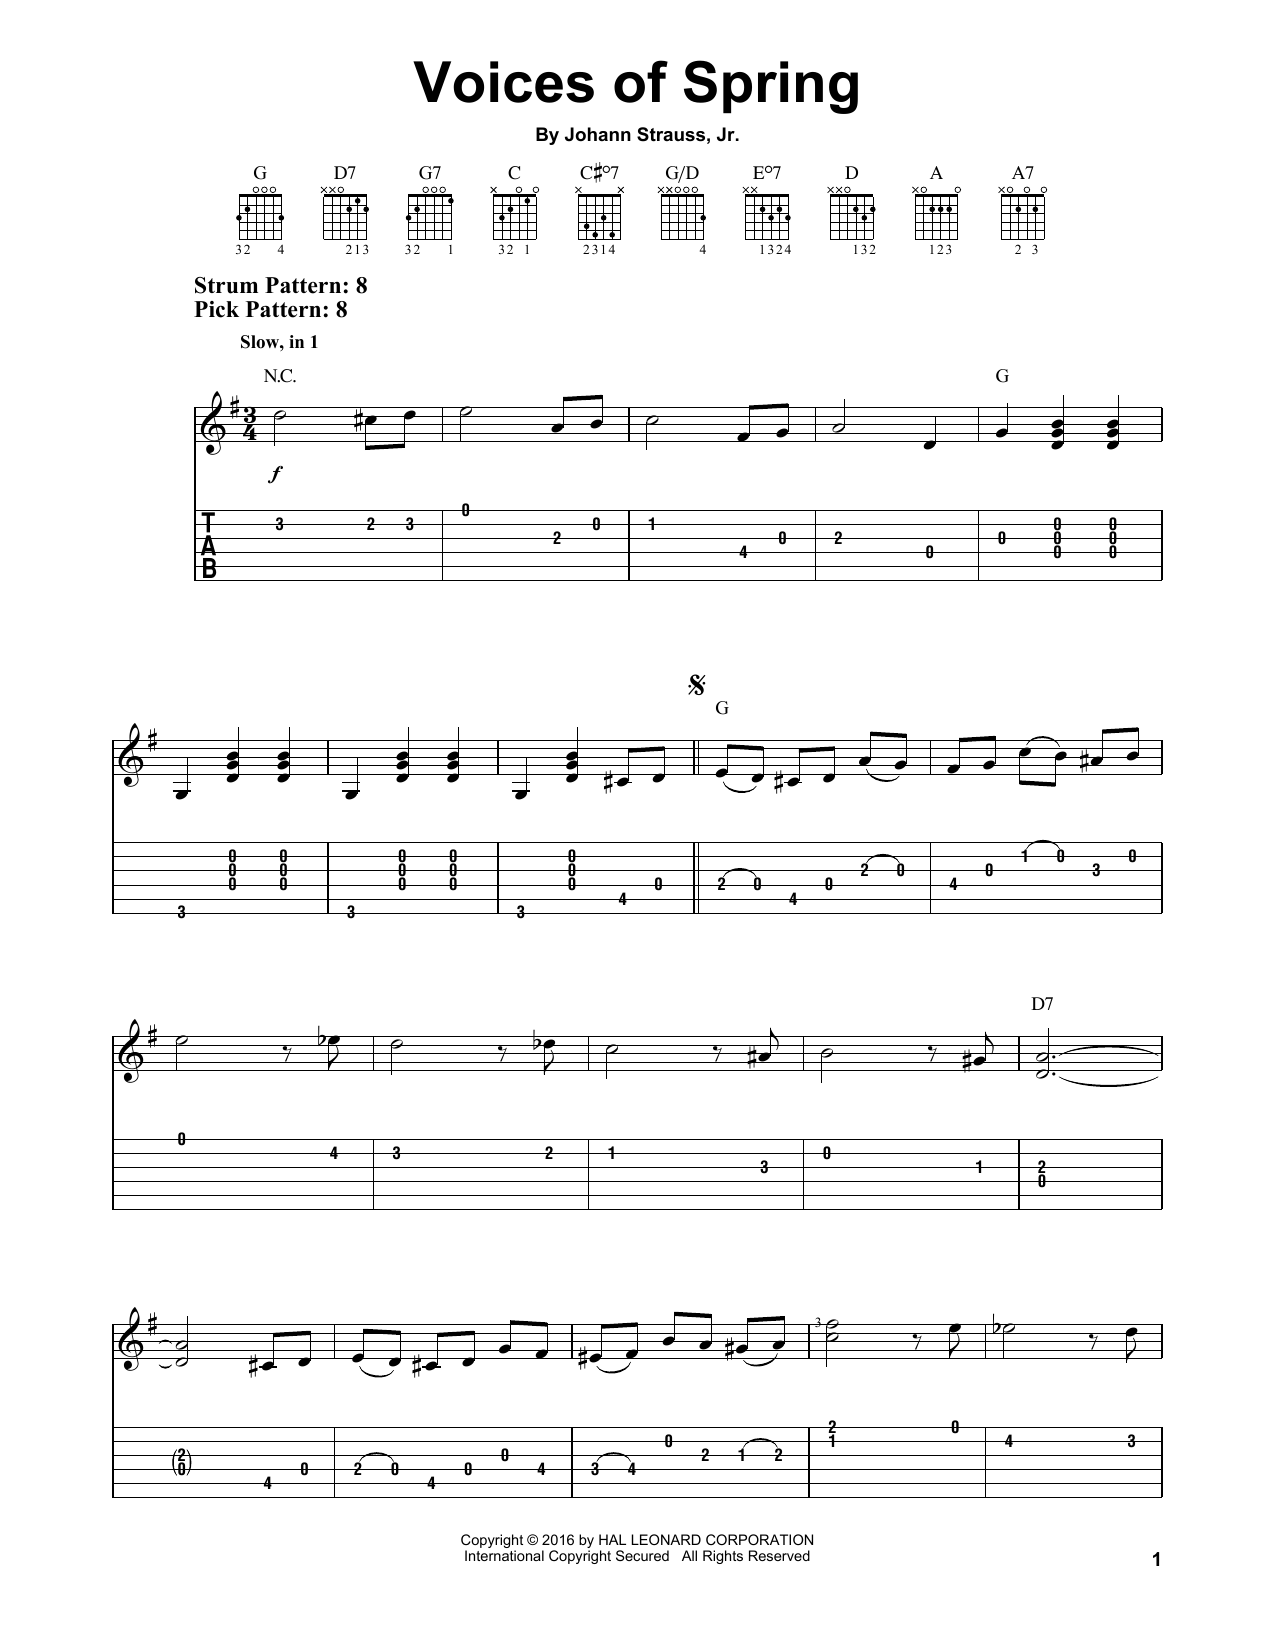 Voices Of Spring by Johann Strauss, Jr. - Easy Guitar Tab - Guitar ...